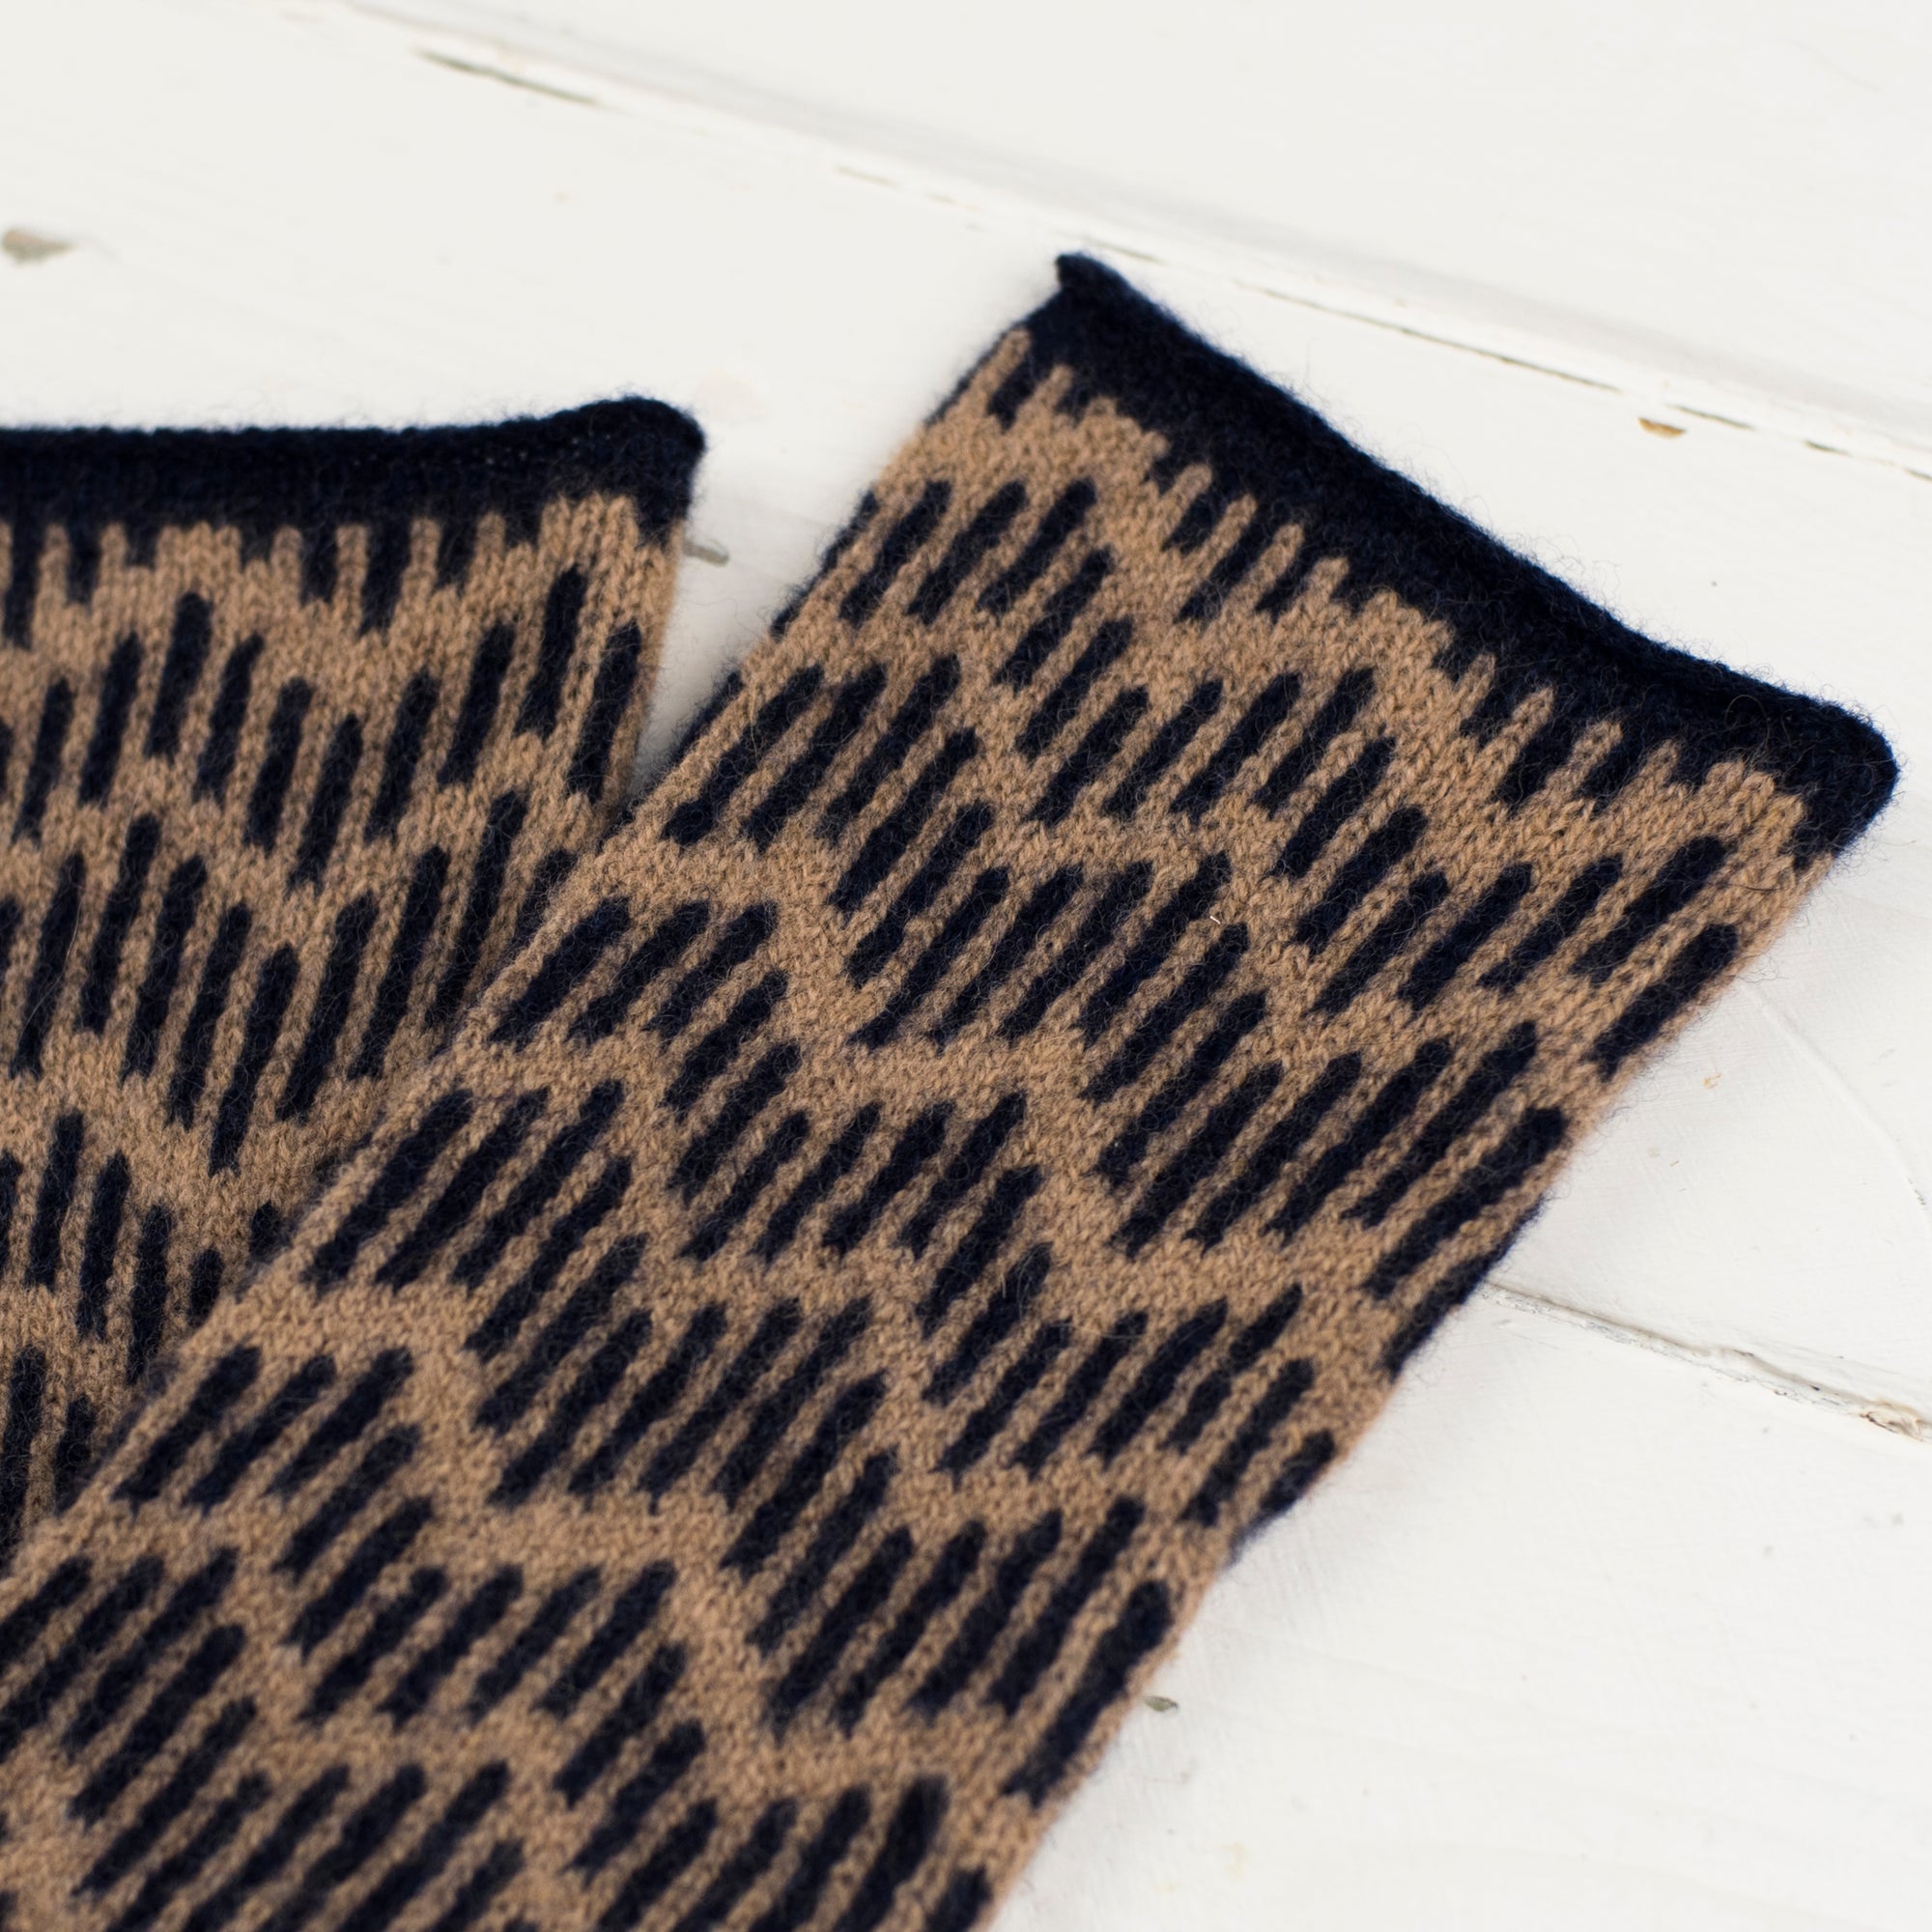 Zig zag wristwarmers - camel and navy (MADE TO ORDER)